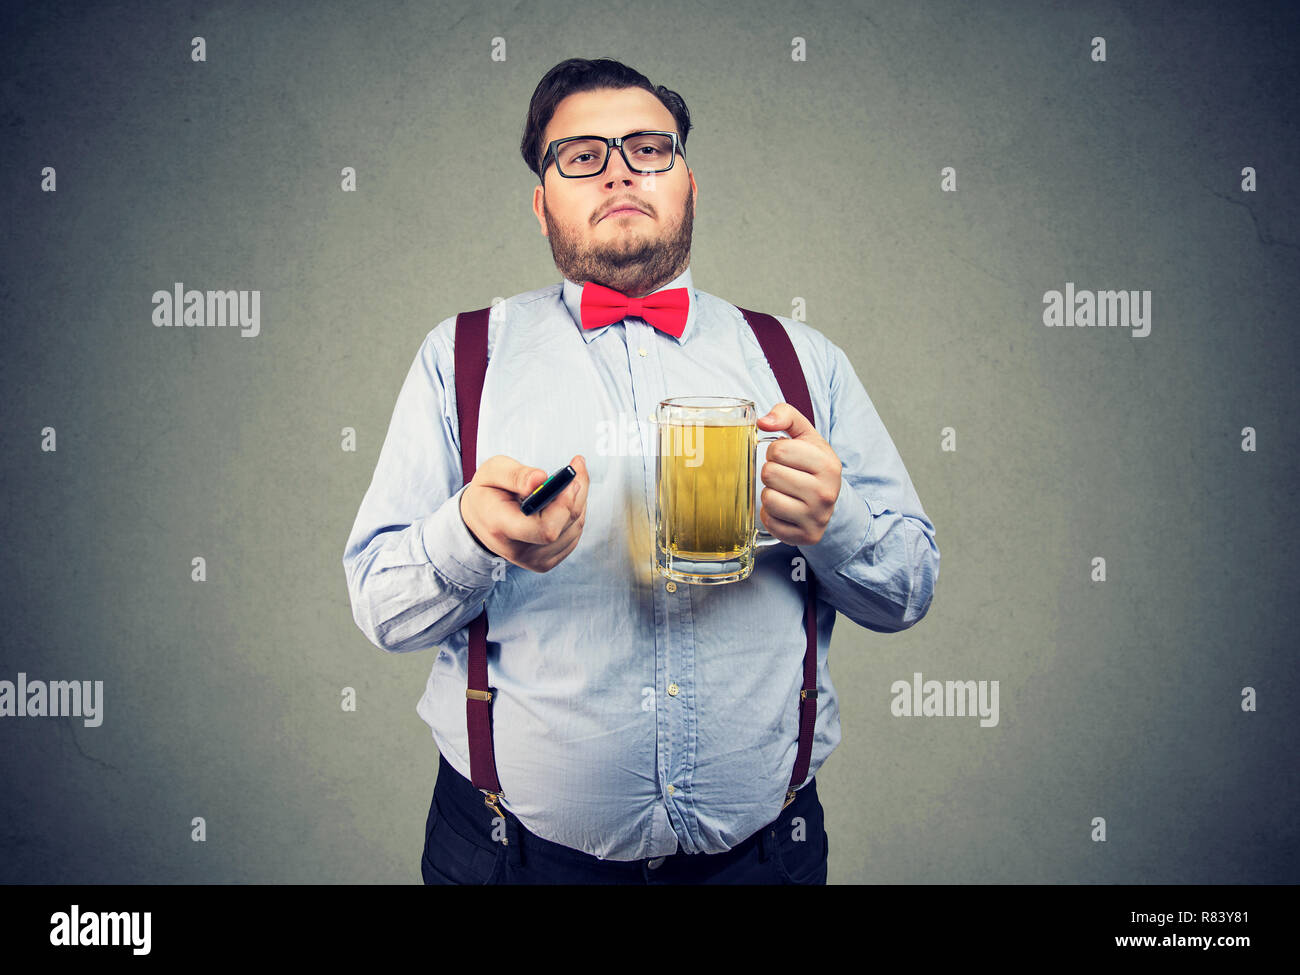 Adult lazy obese man in formal outfit holding mug of beer and watching TV on gray background Stock Photo